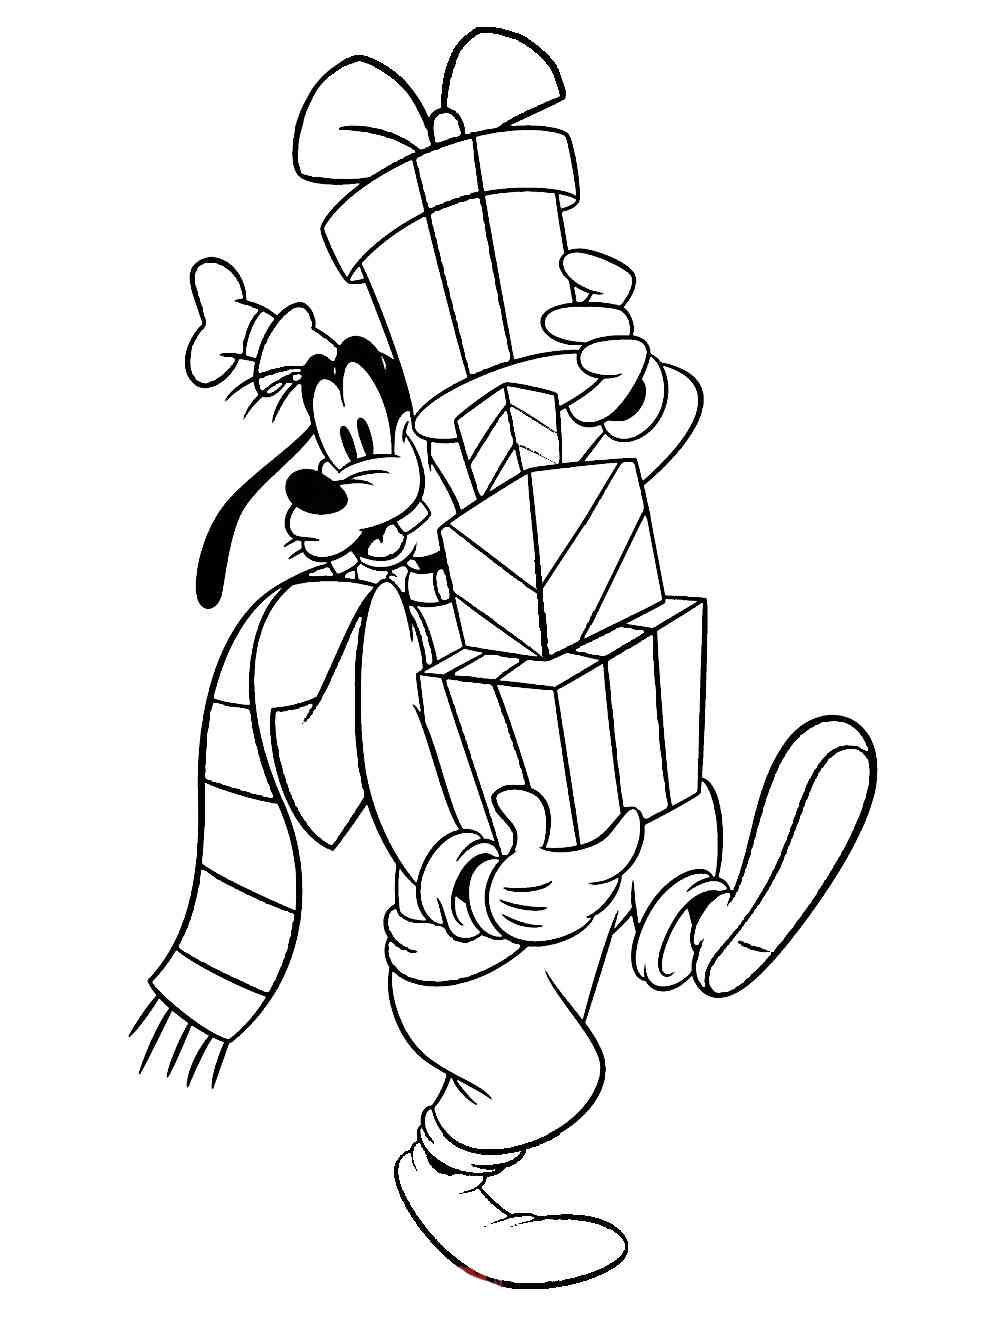 Disney Christmas 12 coloring page